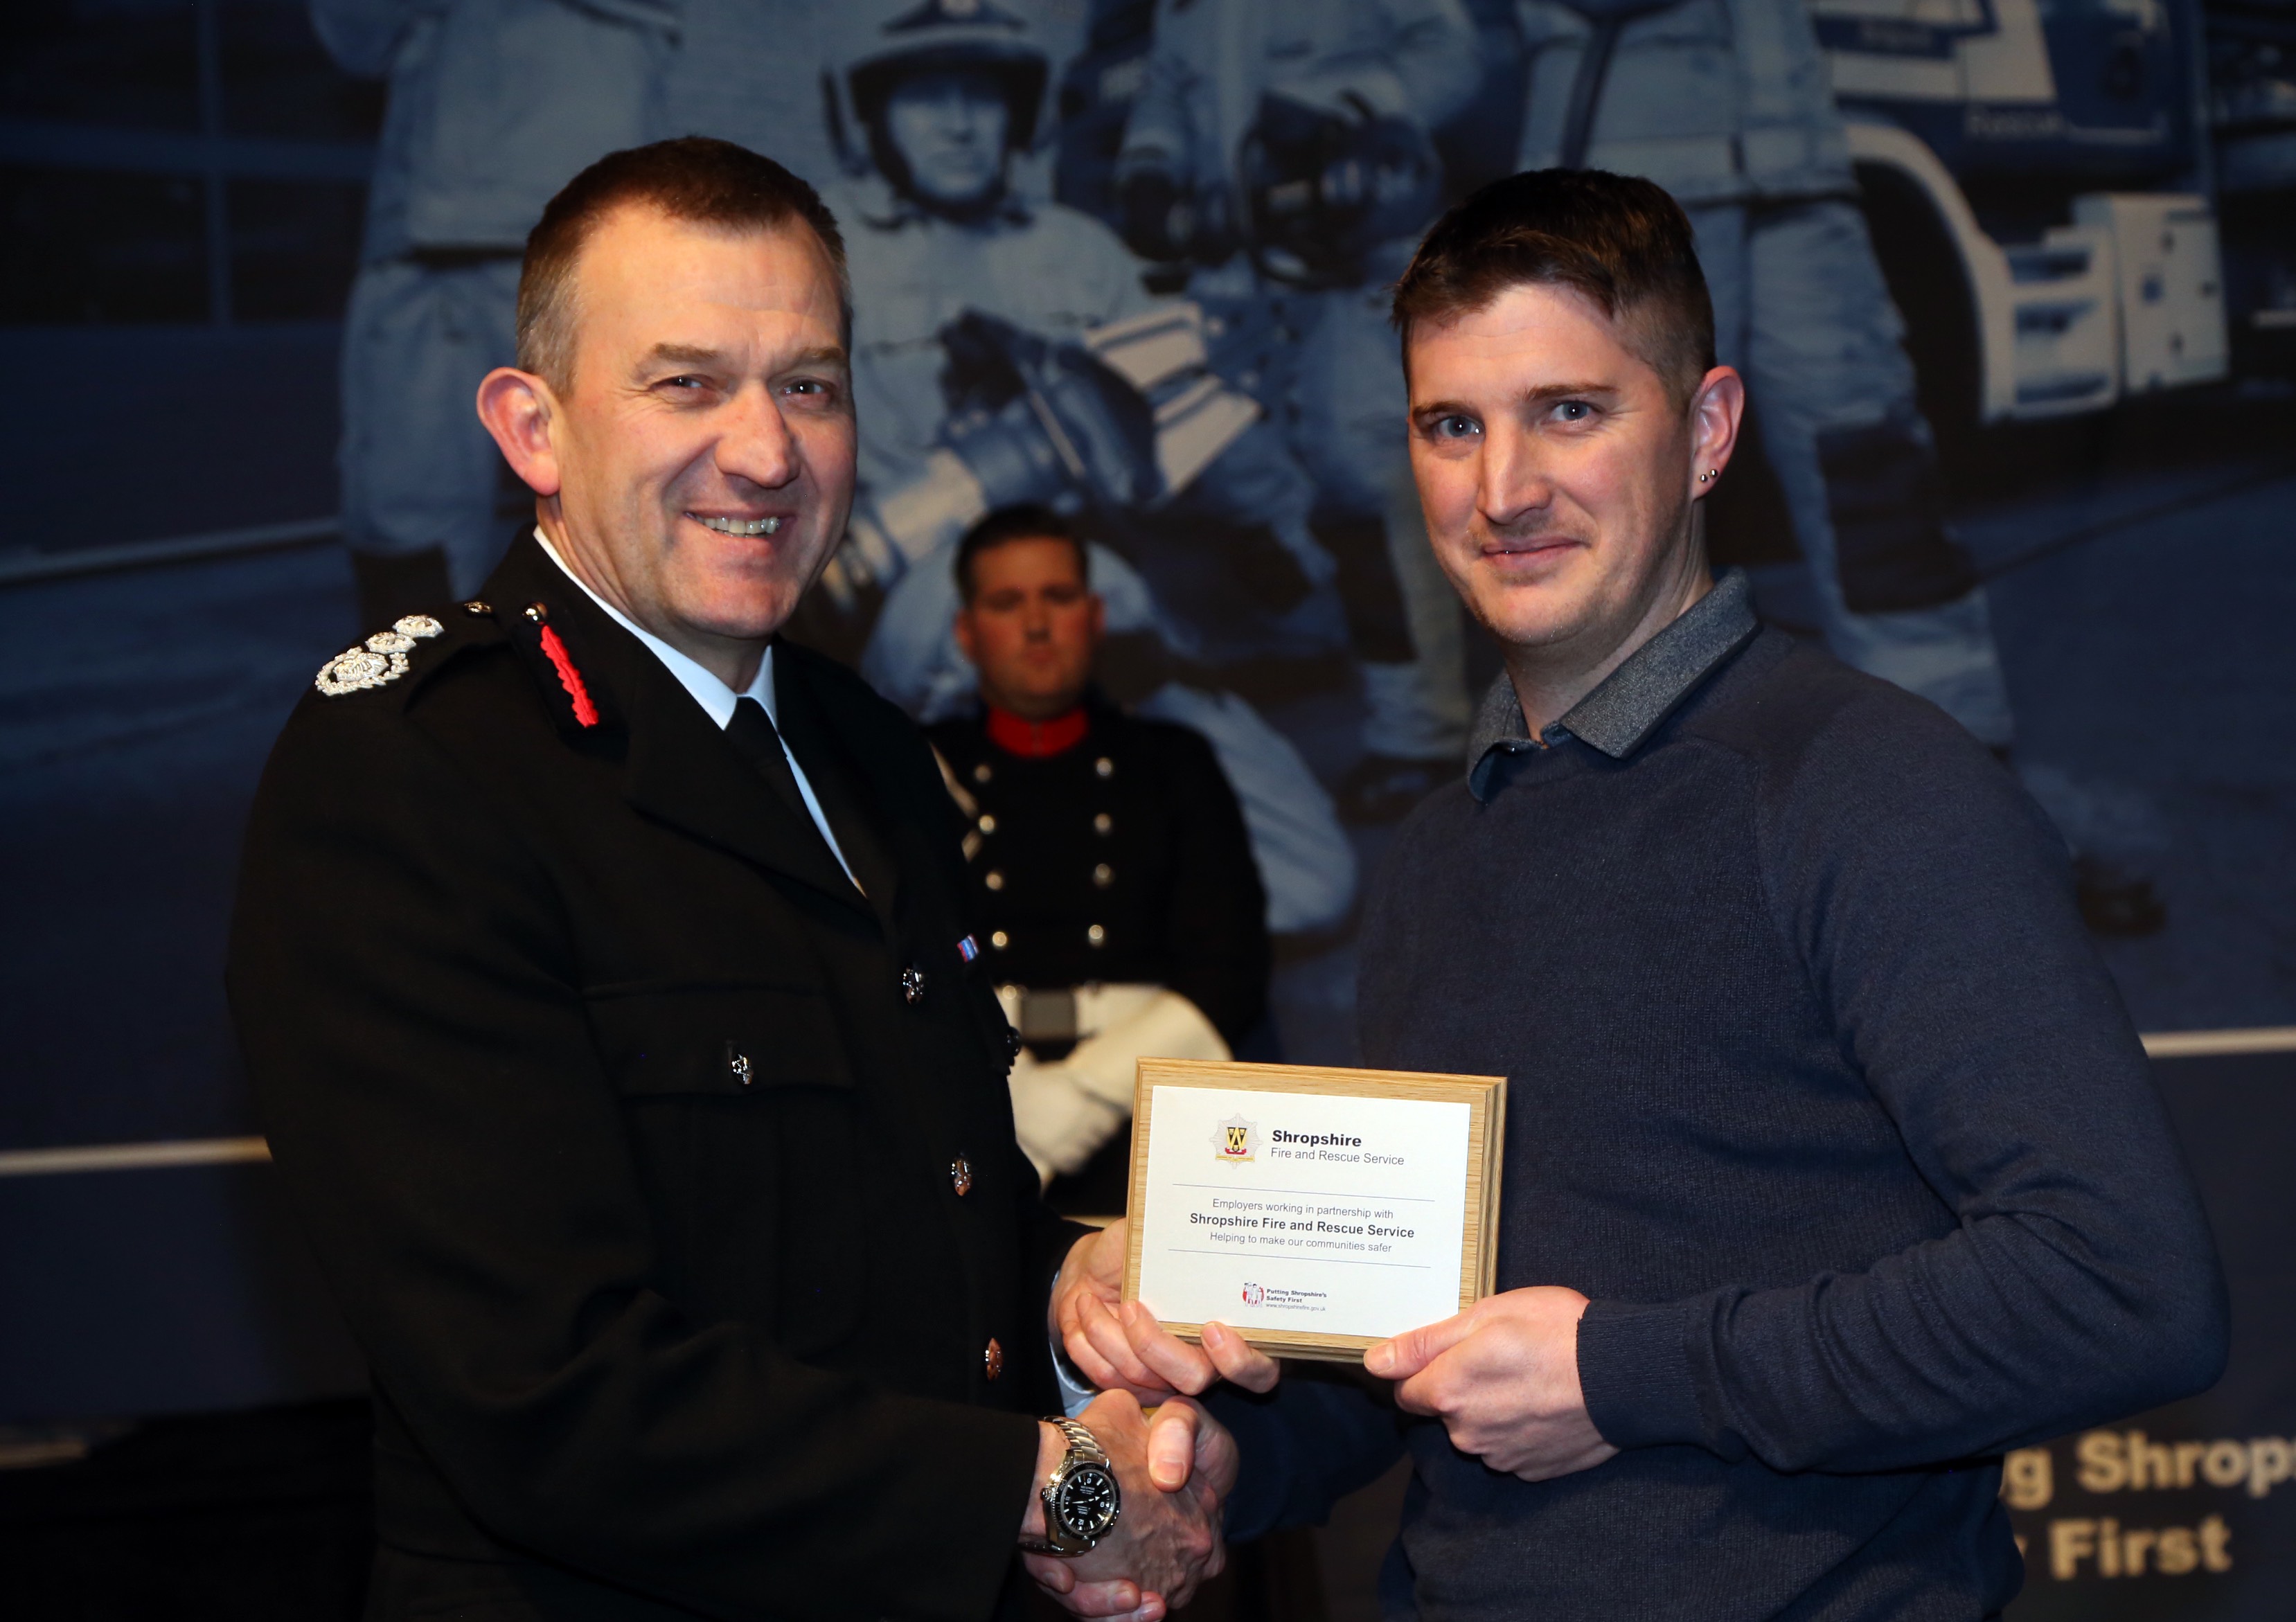 Furrows Customer Service Manager Richard Alderson receives the employers' award from Chief Fire Officer Rod Hammerton